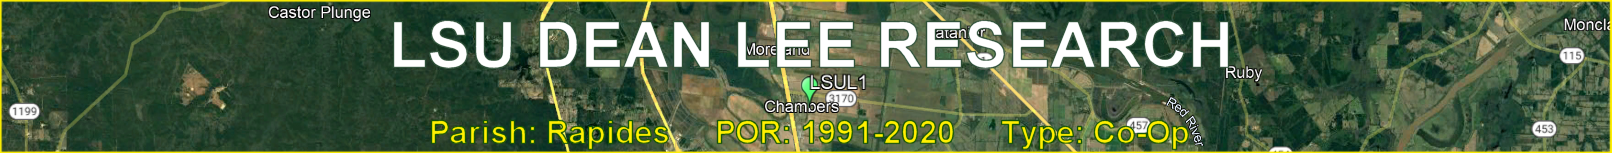 Title image for LSU Dean Lee Research Station